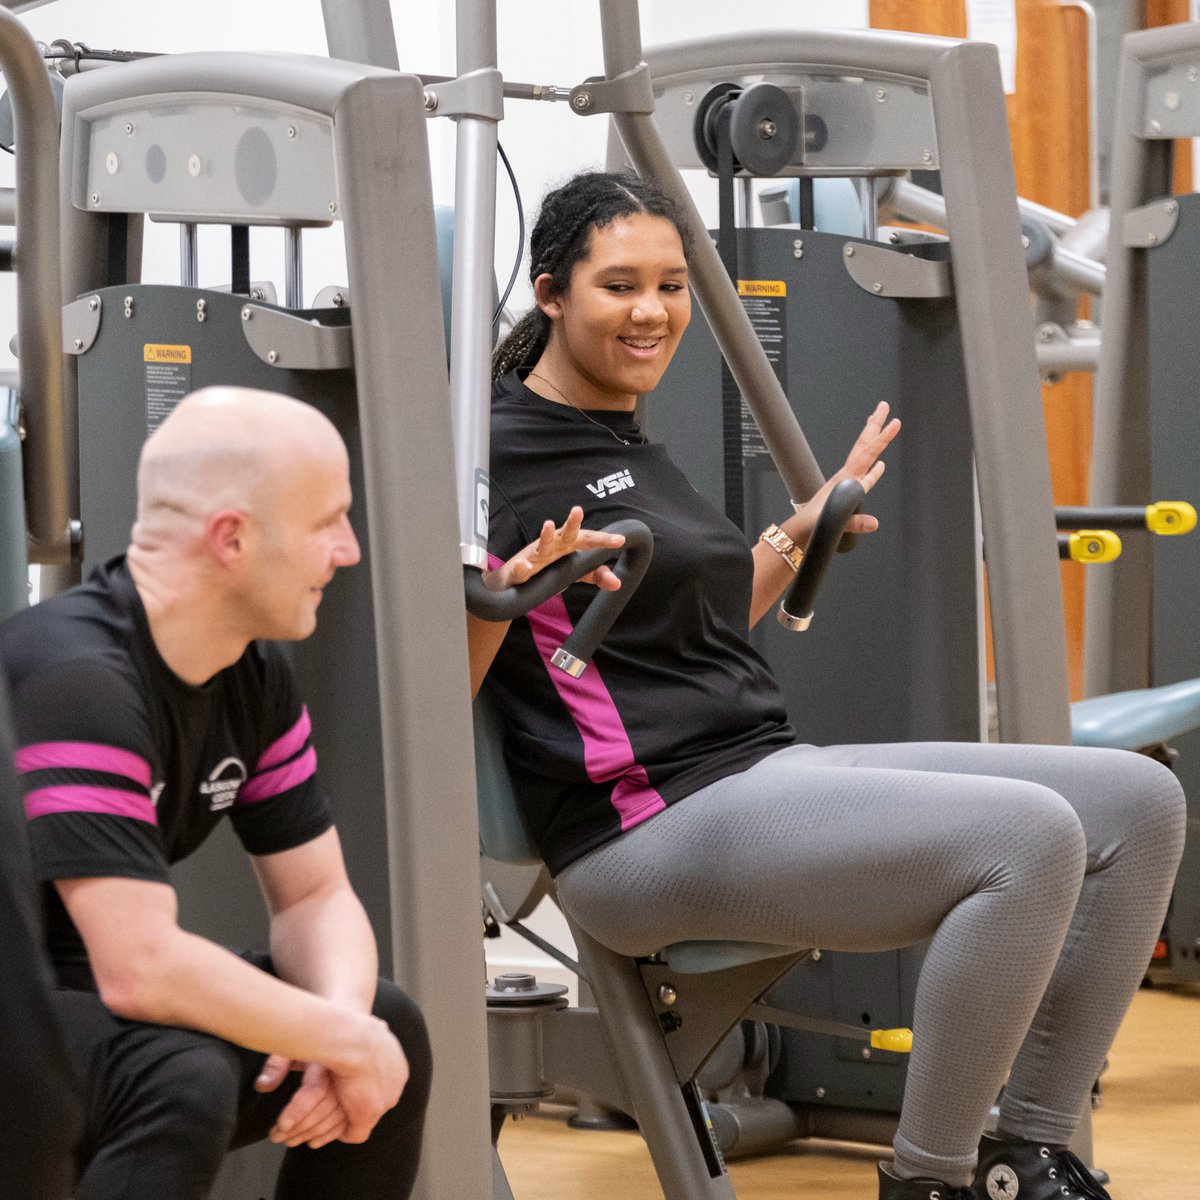 Would you like to work in the fitness and leisure industry? Check out our NQ Fitness, Physical Activity and Health (Level 6) course which prepares you for employment and includes various fitness industry qualifications. Find out more and apply at: bit.ly/43MnFcP